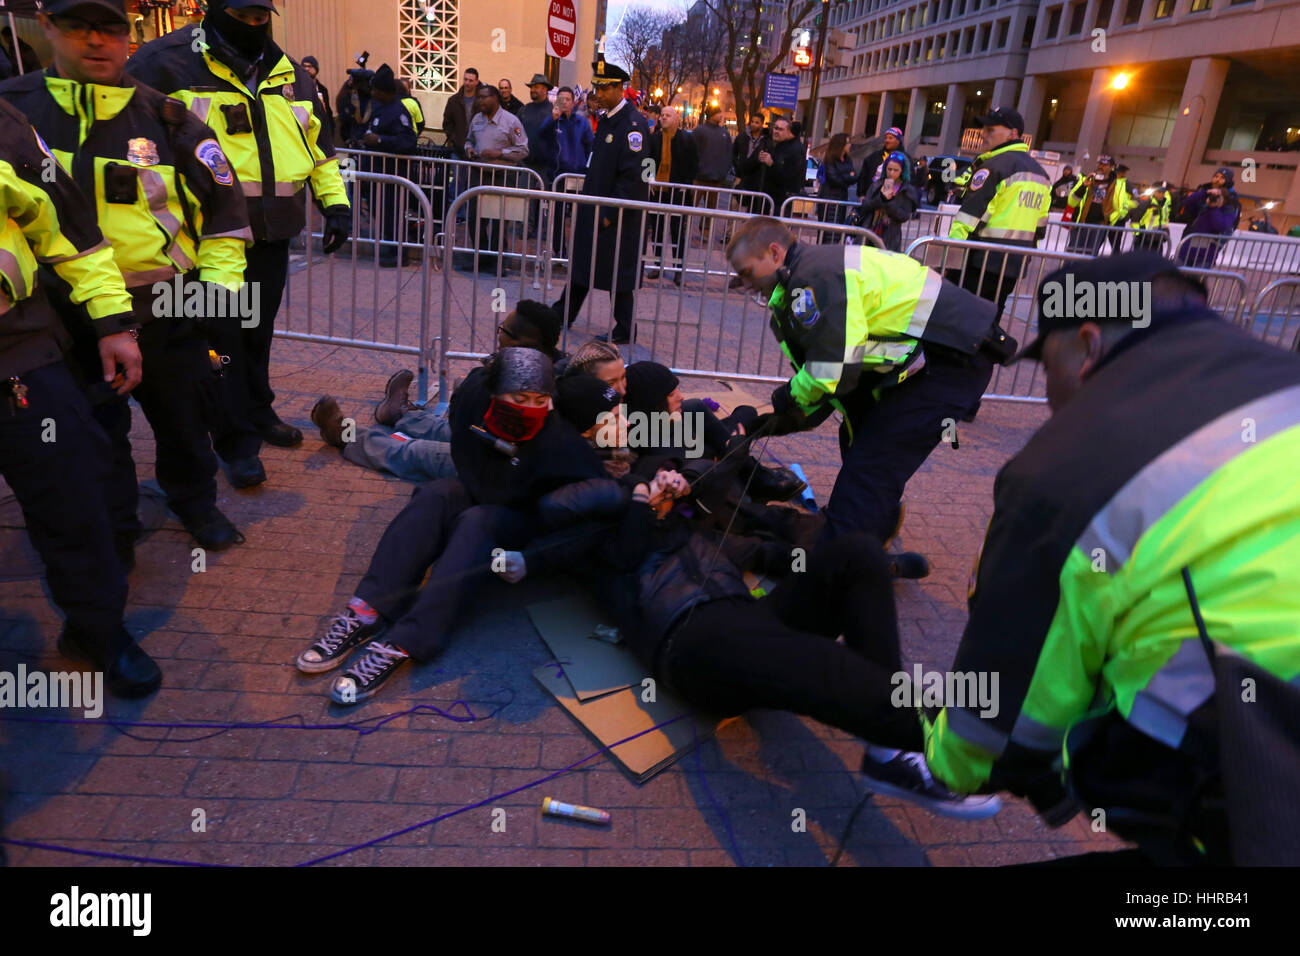 Washington DC, USA. January 20, 2017. Police tear a woman away from a larger group of demonstrators blockading a security checkpoint into the inauguration parade. Demonstrators used direct action techniques--U locks locked around their necks--to stymie efforts by police to remove them from the location. The protesters, organized under The Future is Feminist, was one of several groups disrupting access to the Inaugural Parade. Stock Photo